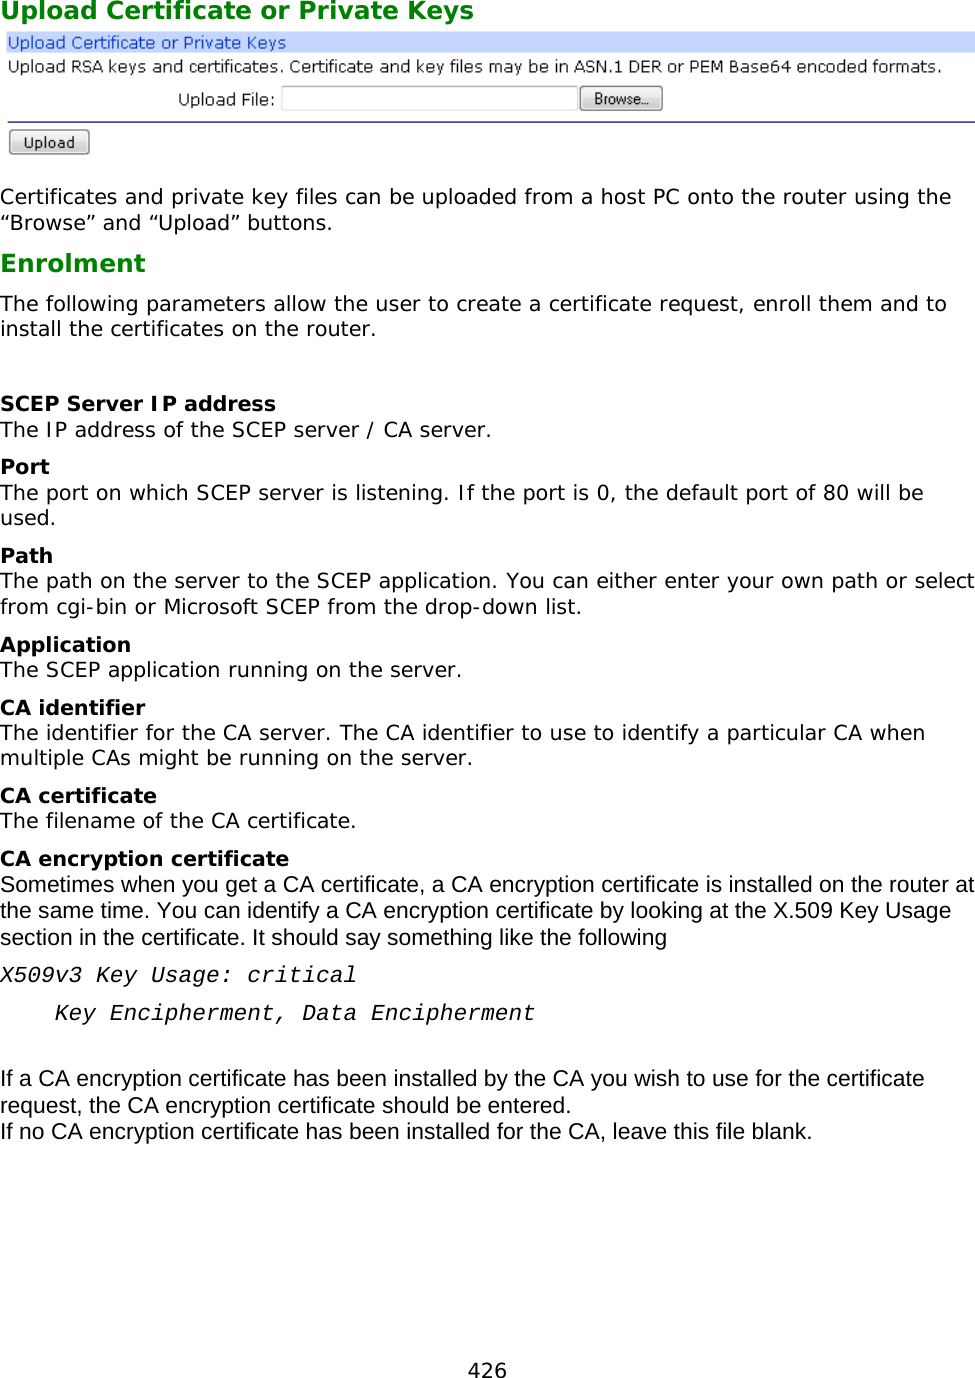 426  Upload Certificate or Private Keys   Certificates and private key files can be uploaded from a host PC onto the router using the “Browse” and “Upload” buttons. Enrolment The following parameters allow the user to create a certificate request, enroll them and to install the certificates on the router.  SCEP Server IP address The IP address of the SCEP server / CA server. Port The port on which SCEP server is listening. If the port is 0, the default port of 80 will be used. Path The path on the server to the SCEP application. You can either enter your own path or select from cgi-bin or Microsoft SCEP from the drop-down list. Application The SCEP application running on the server. CA identifier The identifier for the CA server. The CA identifier to use to identify a particular CA when multiple CAs might be running on the server. CA certificate The filename of the CA certificate. CA encryption certificate Sometimes when you get a CA certificate, a CA encryption certificate is installed on the router at the same time. You can identify a CA encryption certificate by looking at the X.509 Key Usage section in the certificate. It should say something like the following X509v3 Key Usage: critical     Key Encipherment, Data Encipherment  If a CA encryption certificate has been installed by the CA you wish to use for the certificate request, the CA encryption certificate should be entered. If no CA encryption certificate has been installed for the CA, leave this file blank.    